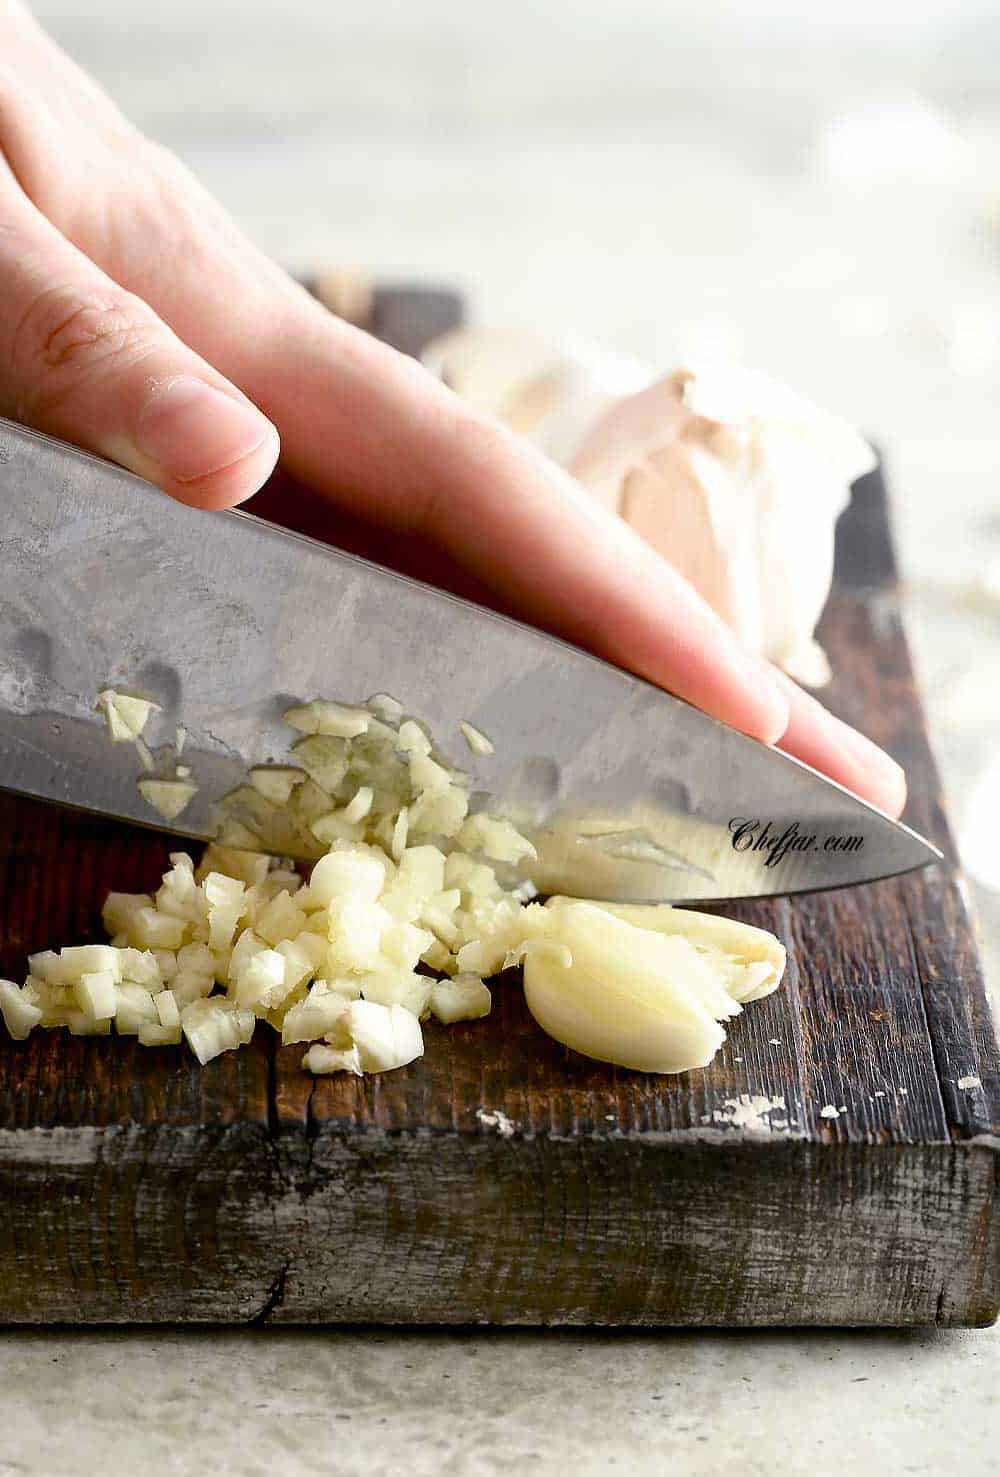 The photo shows how to cut garlic by finely mincing it